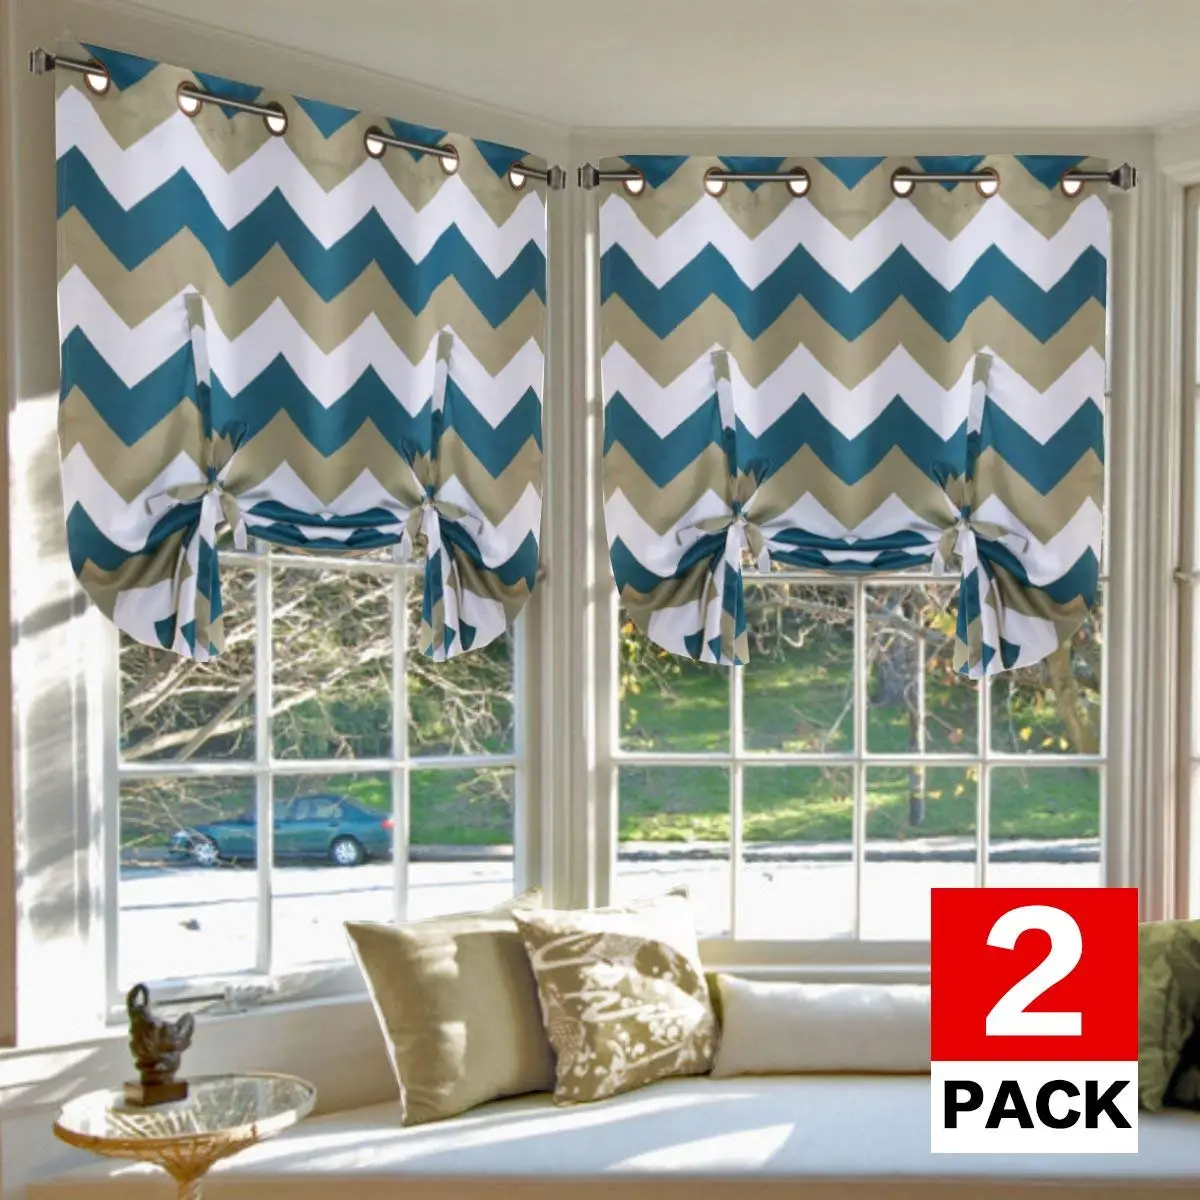 Cheap Teal Window Curtains Find Teal Window Curtains Deals On